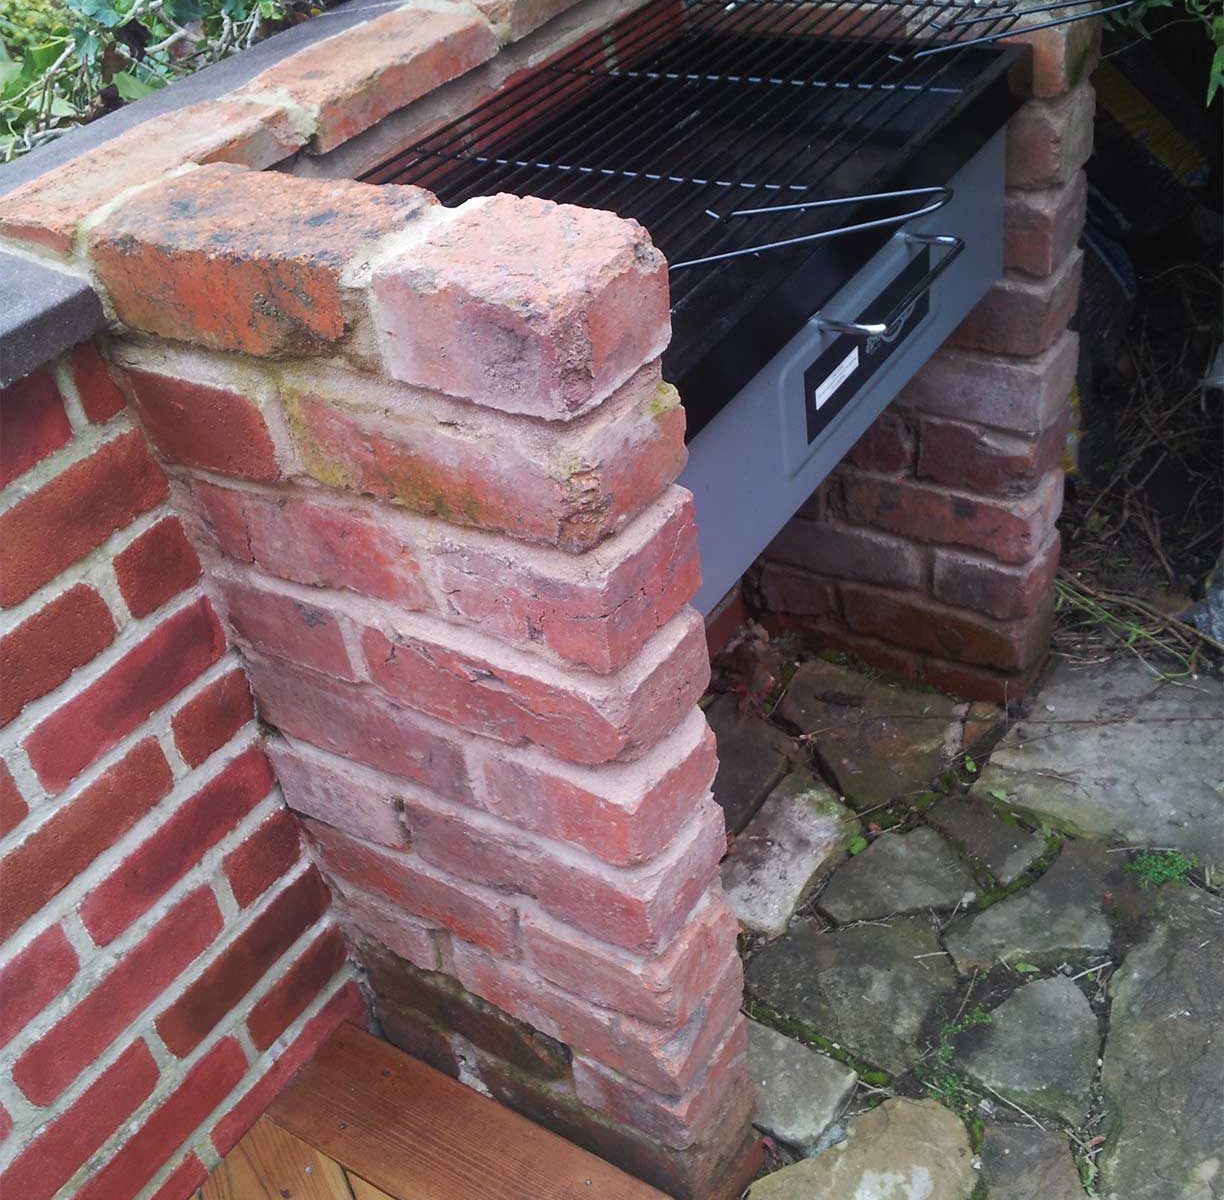 Barbecue complete with recoloured wall and coping stones